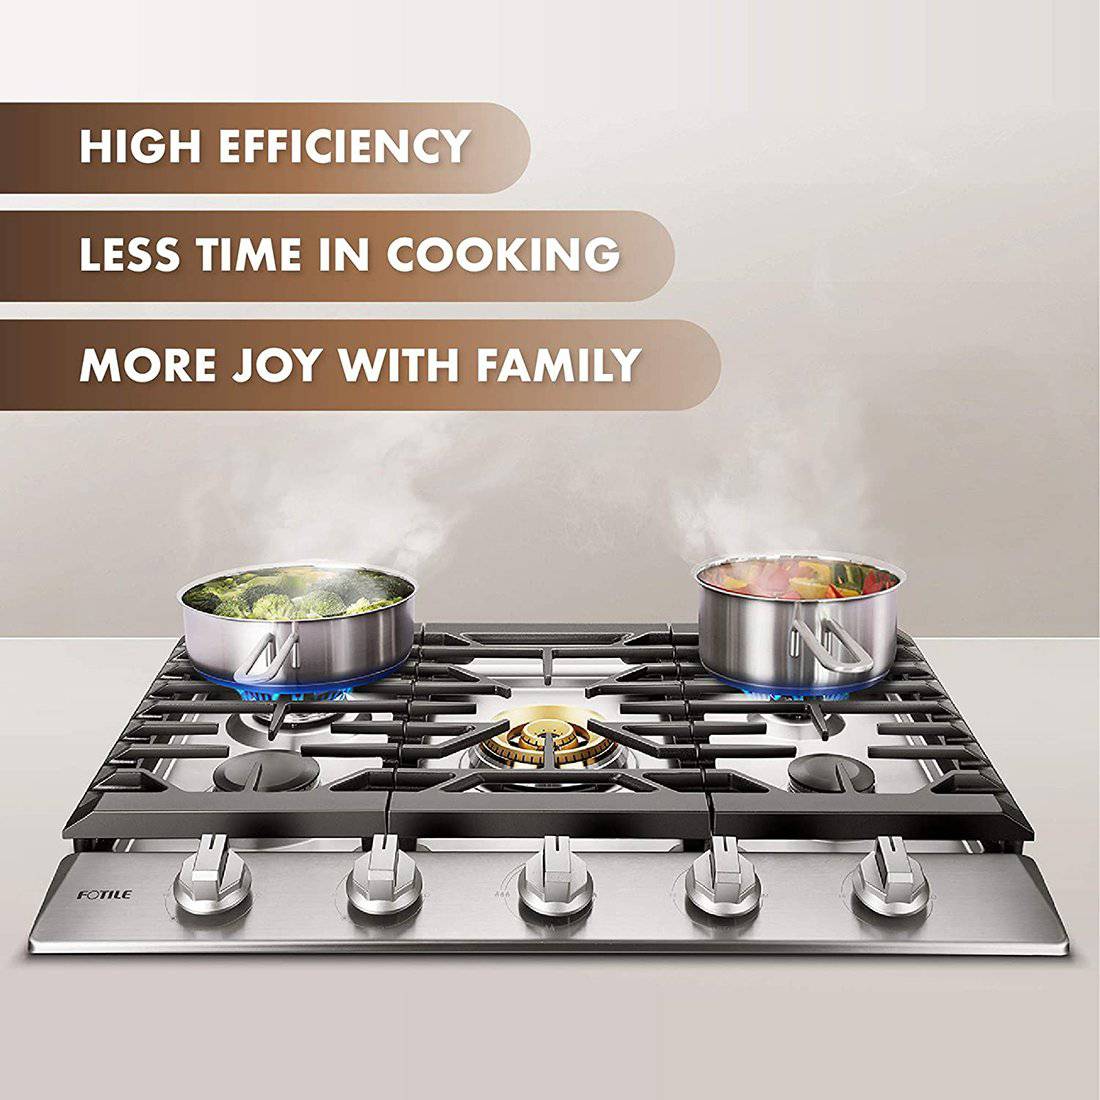 https://us.fotileglobal.com/cdn/shop/products/tri-ring-30-in-gas-cooktop-in-stainless-steel-with-5-burners-56-000-btus-with-flame-failure-device-gls30501-30-29211429830834.jpg?v=1671210469